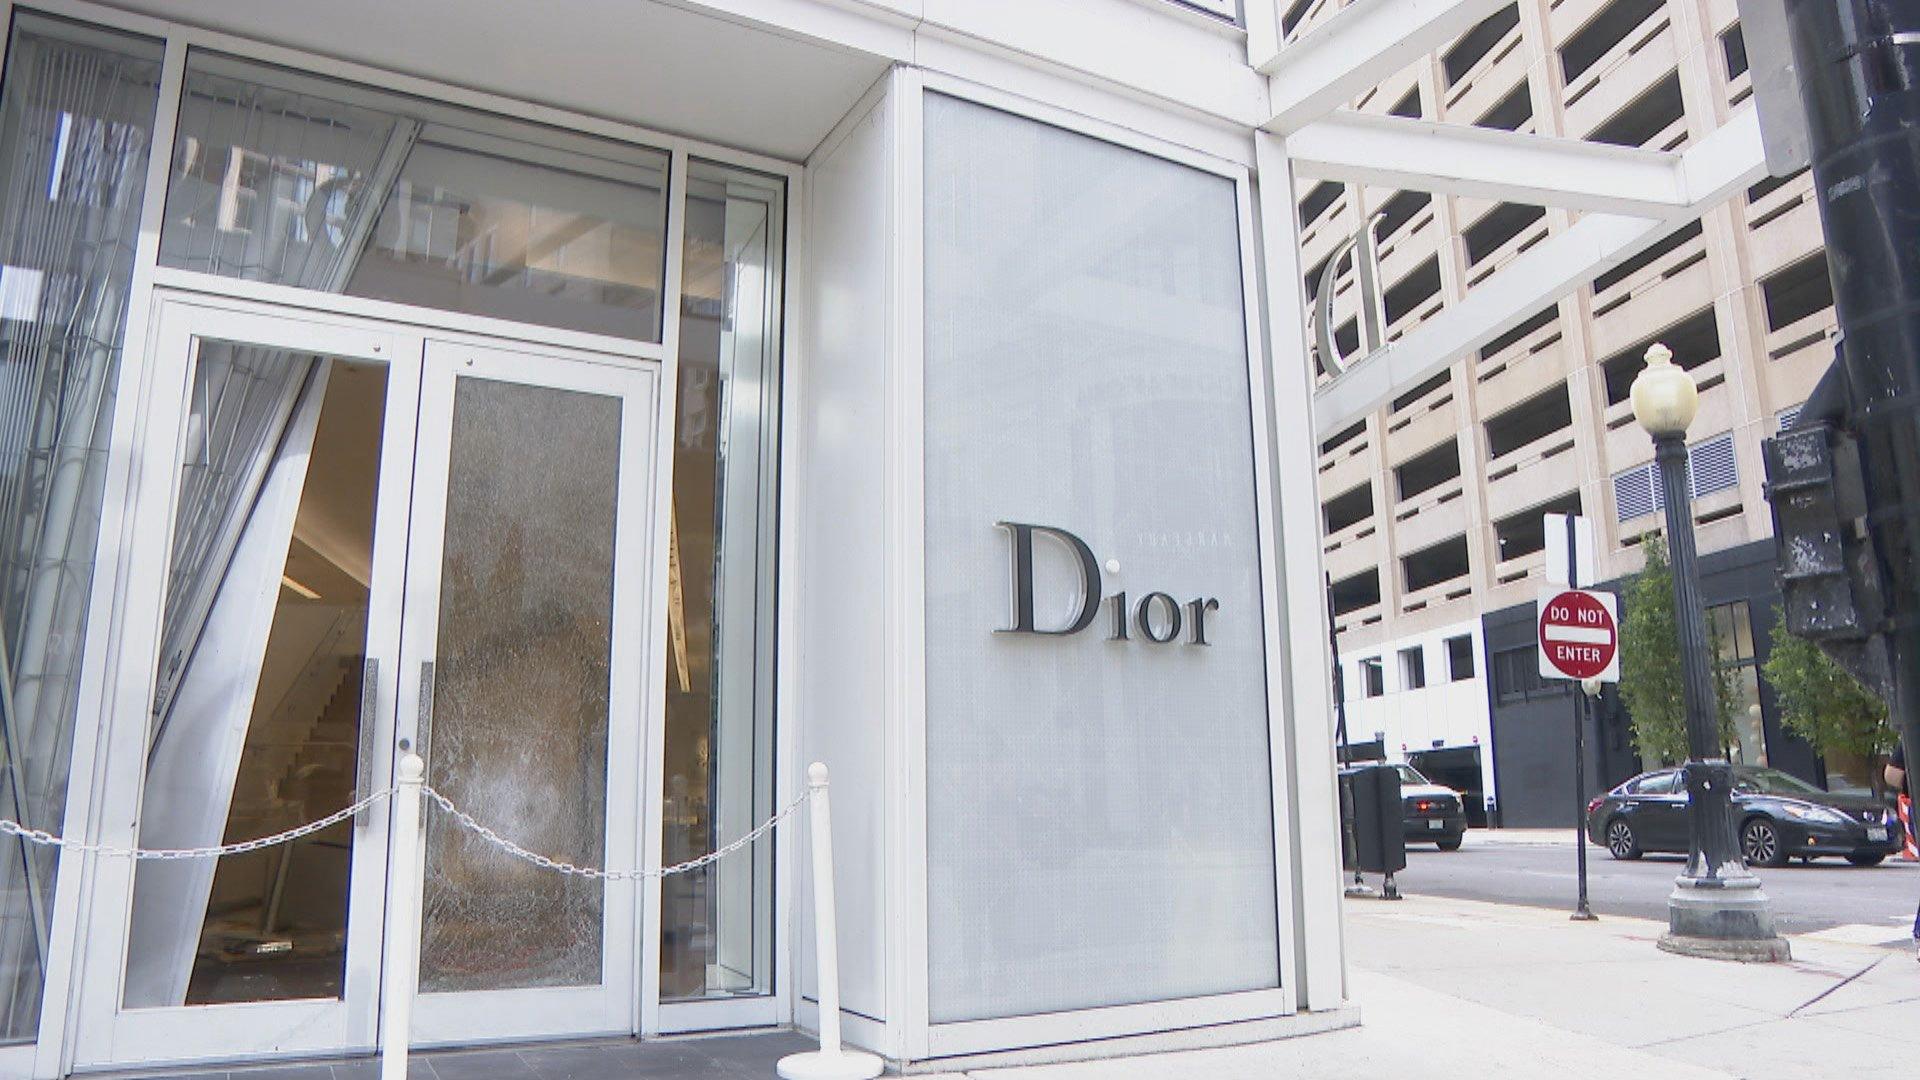 Broken windows at a Dior store in downtown Chicago on Monday, Aug. 10, 2020. (WTTW News)